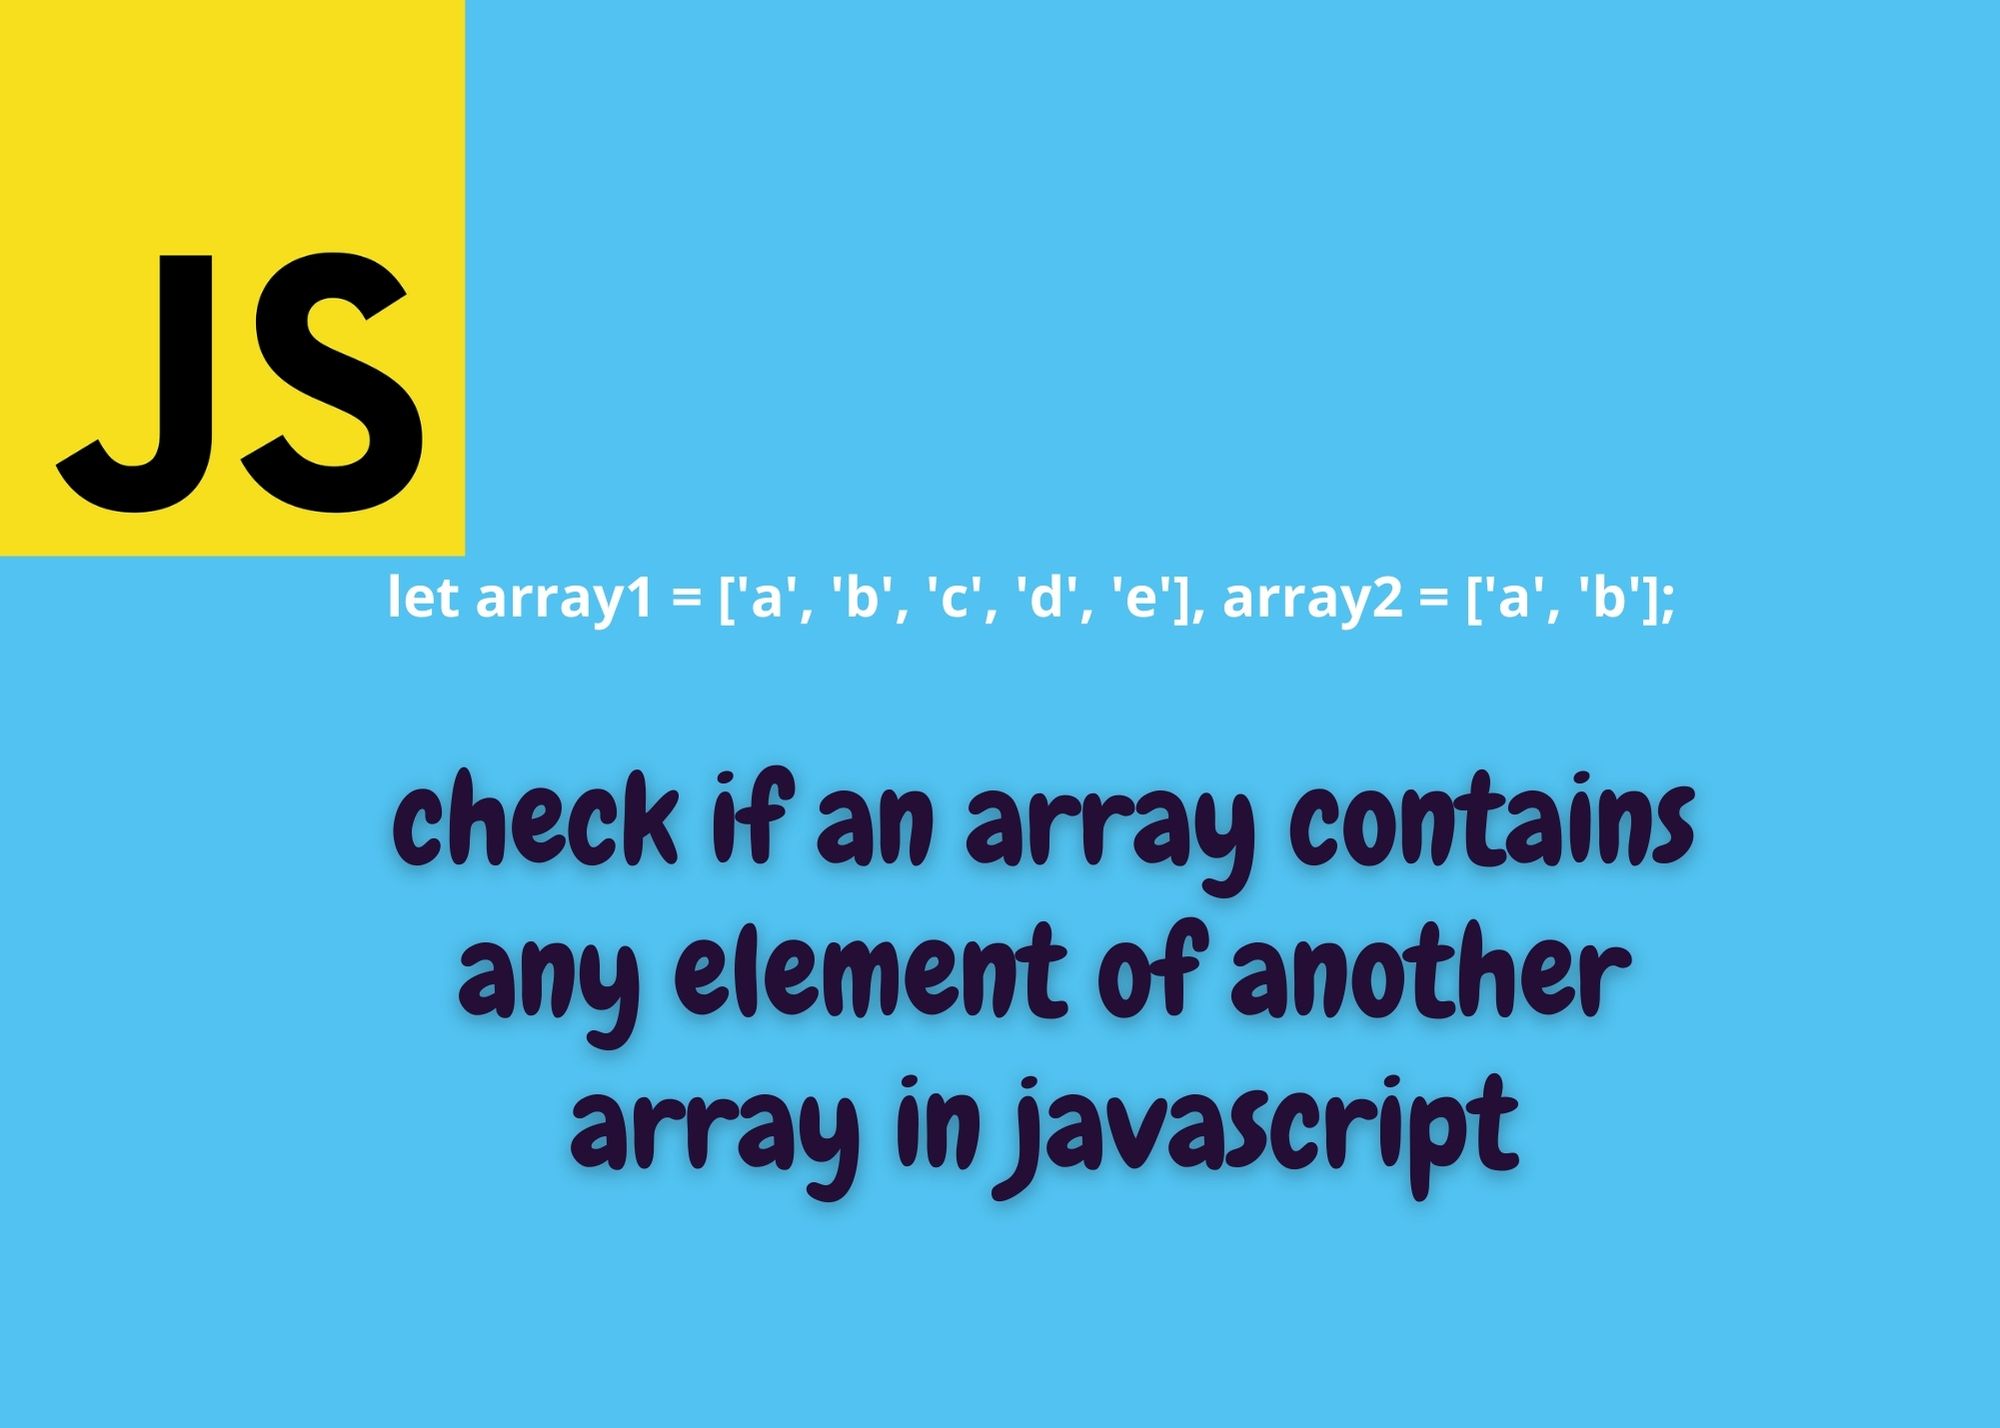 How to check if an array is the same as another array in javascript